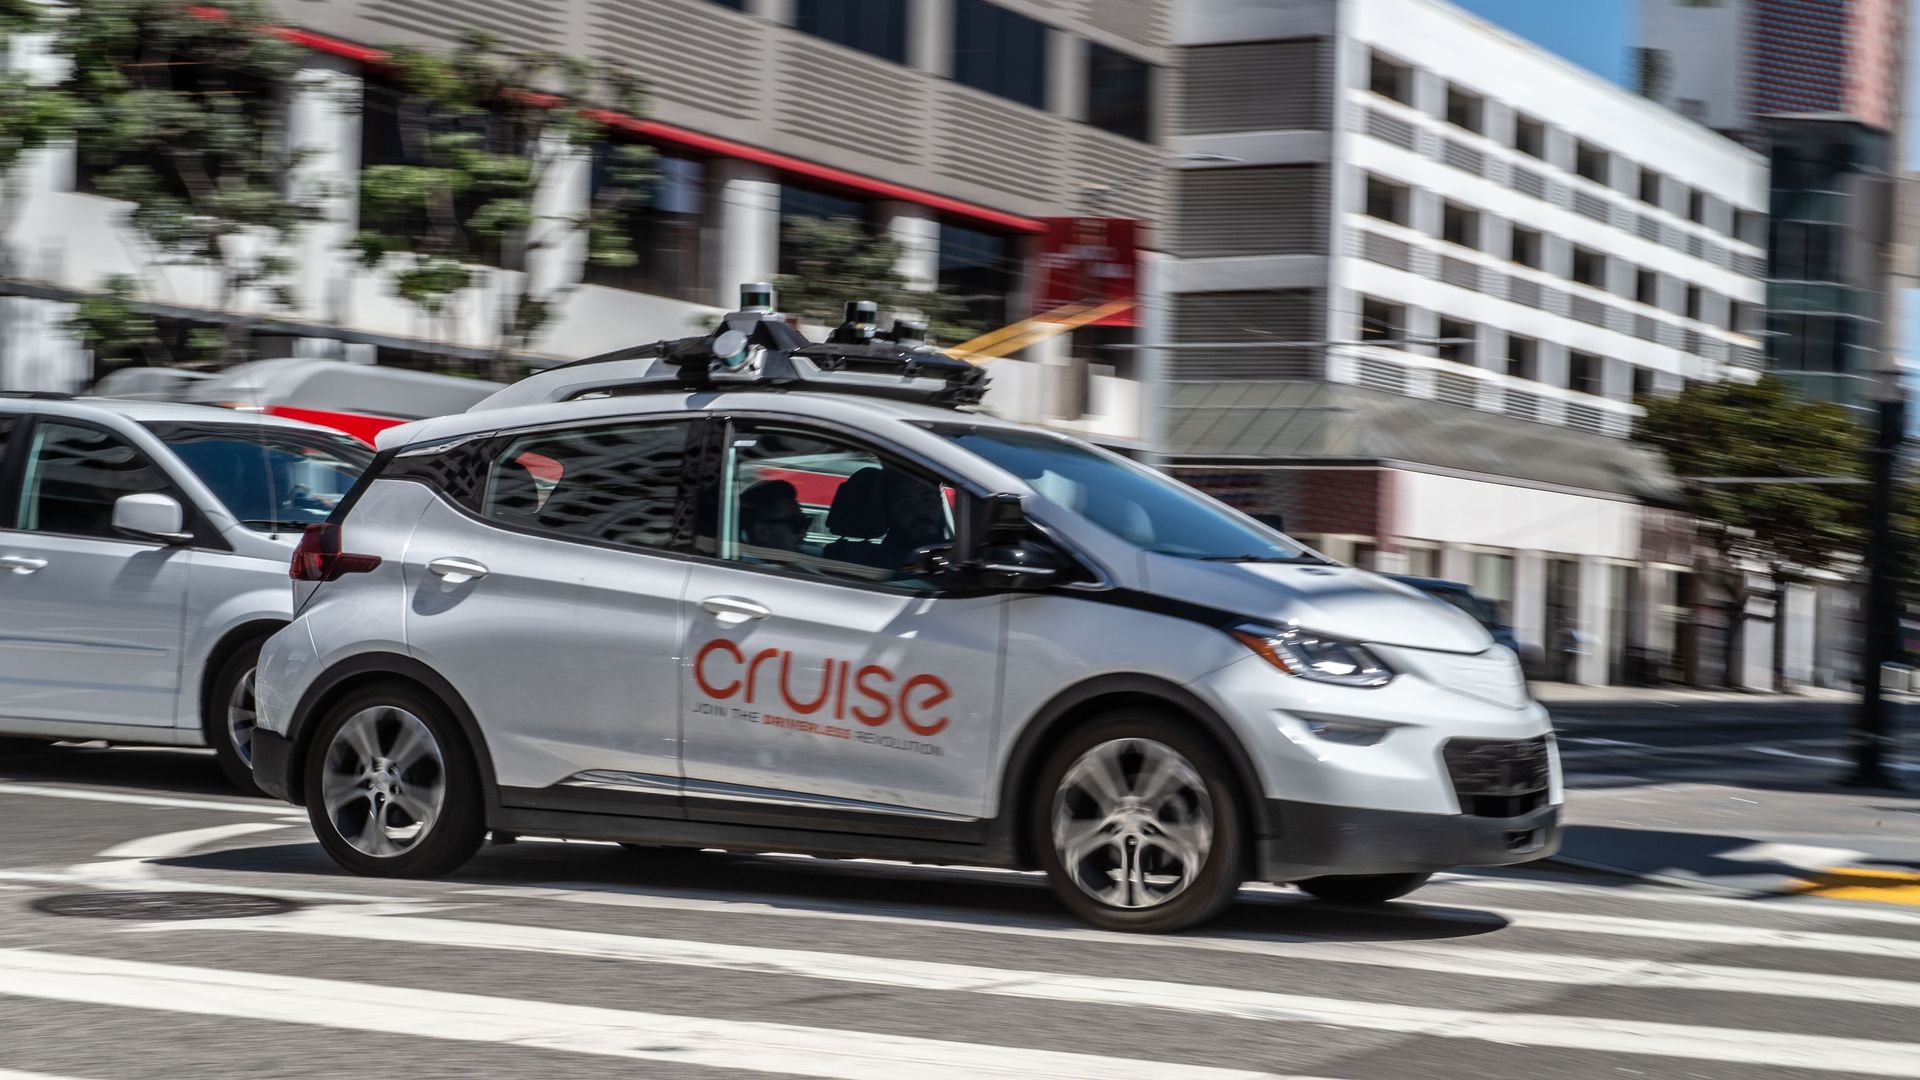 GM Cruise test self-driving vehicle driving through an intersection